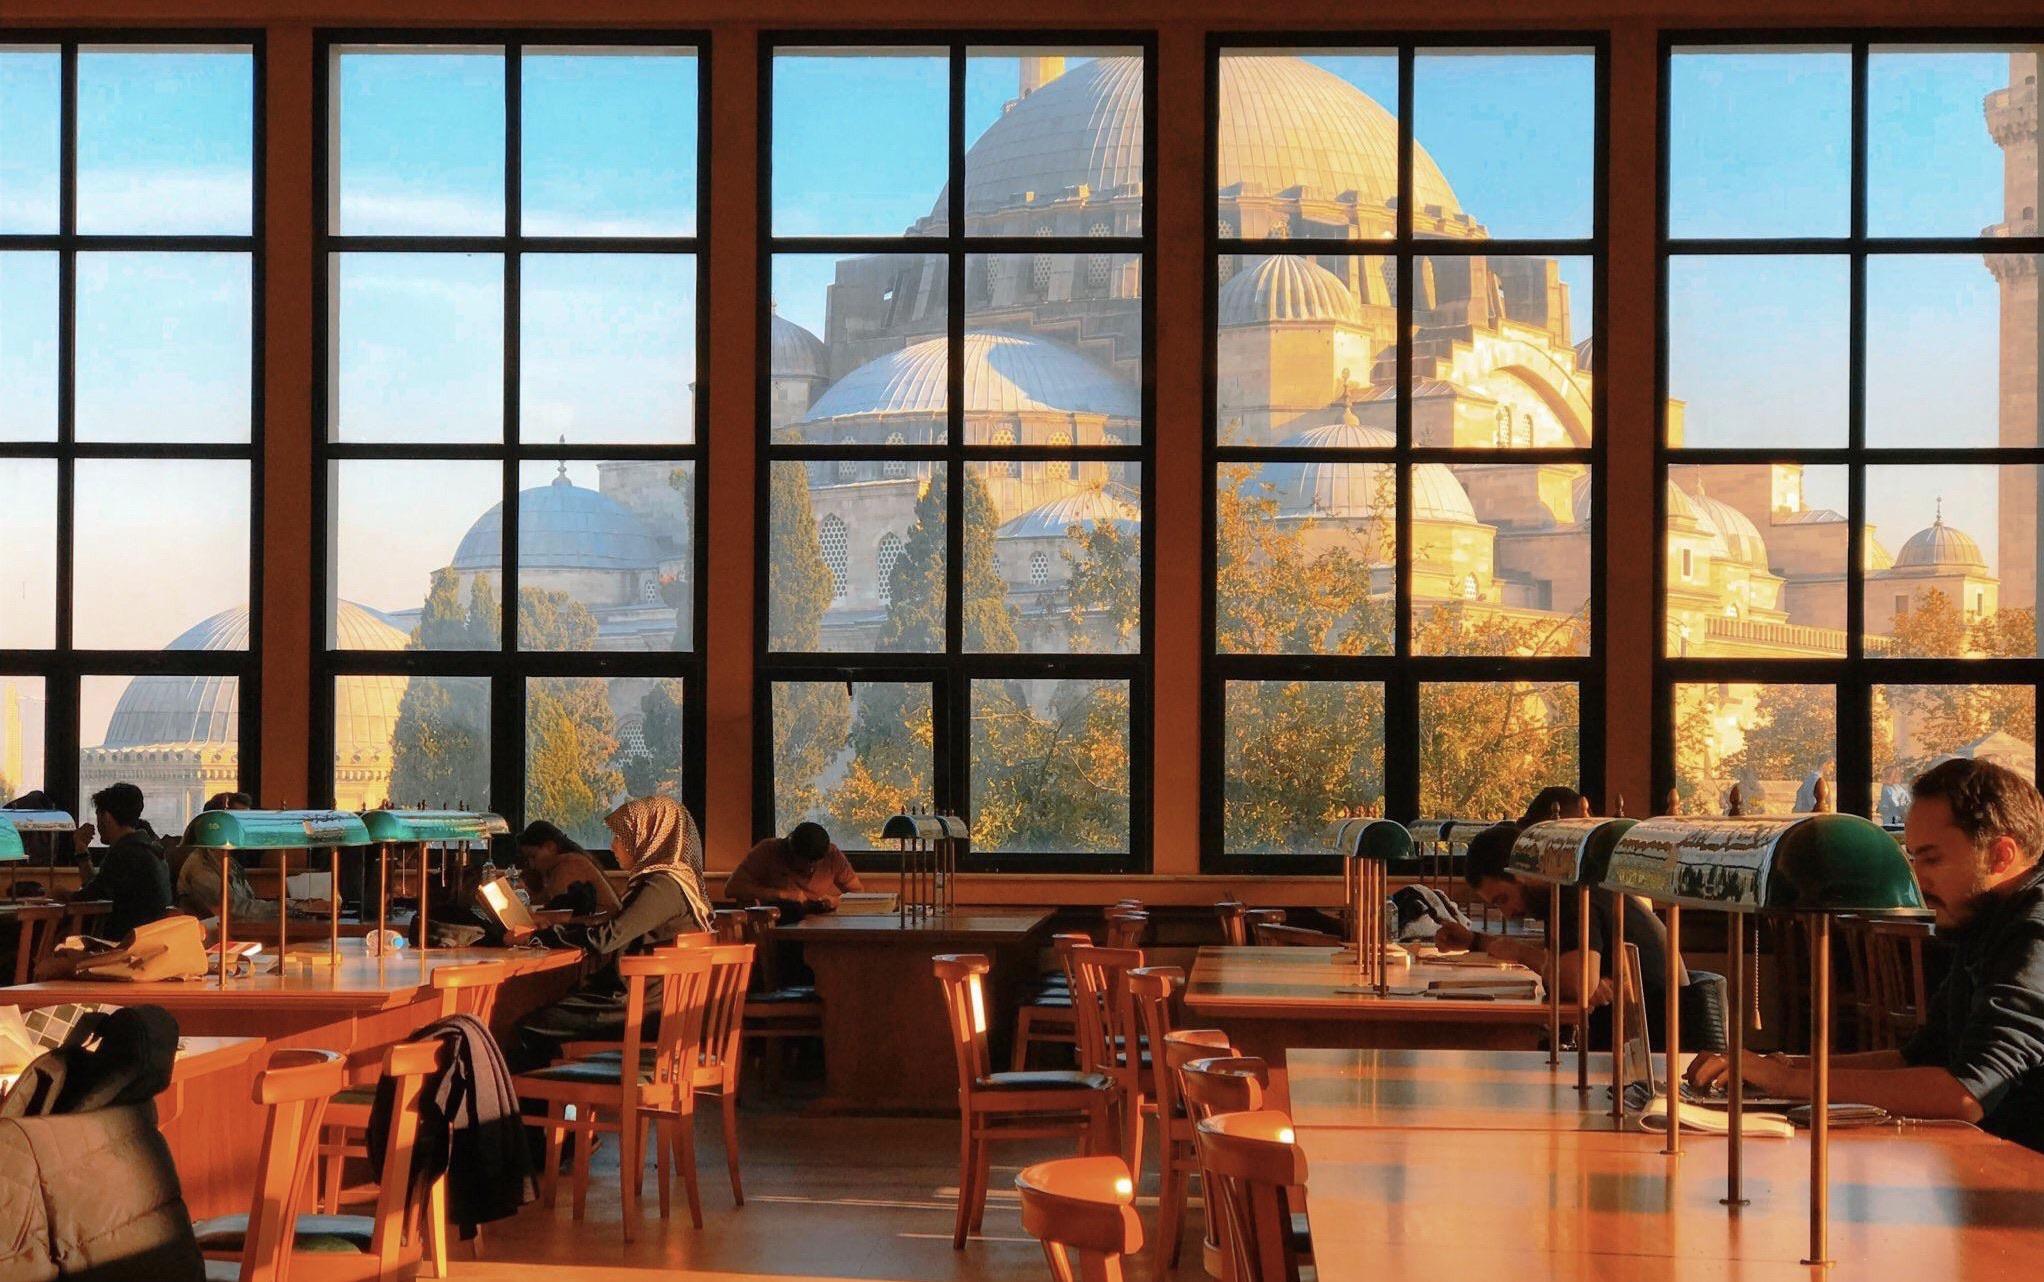 Istanbul Turkey Library University People Students Mosque Chair Table Lamp Window Suleymaniye Mosque 2044x1282